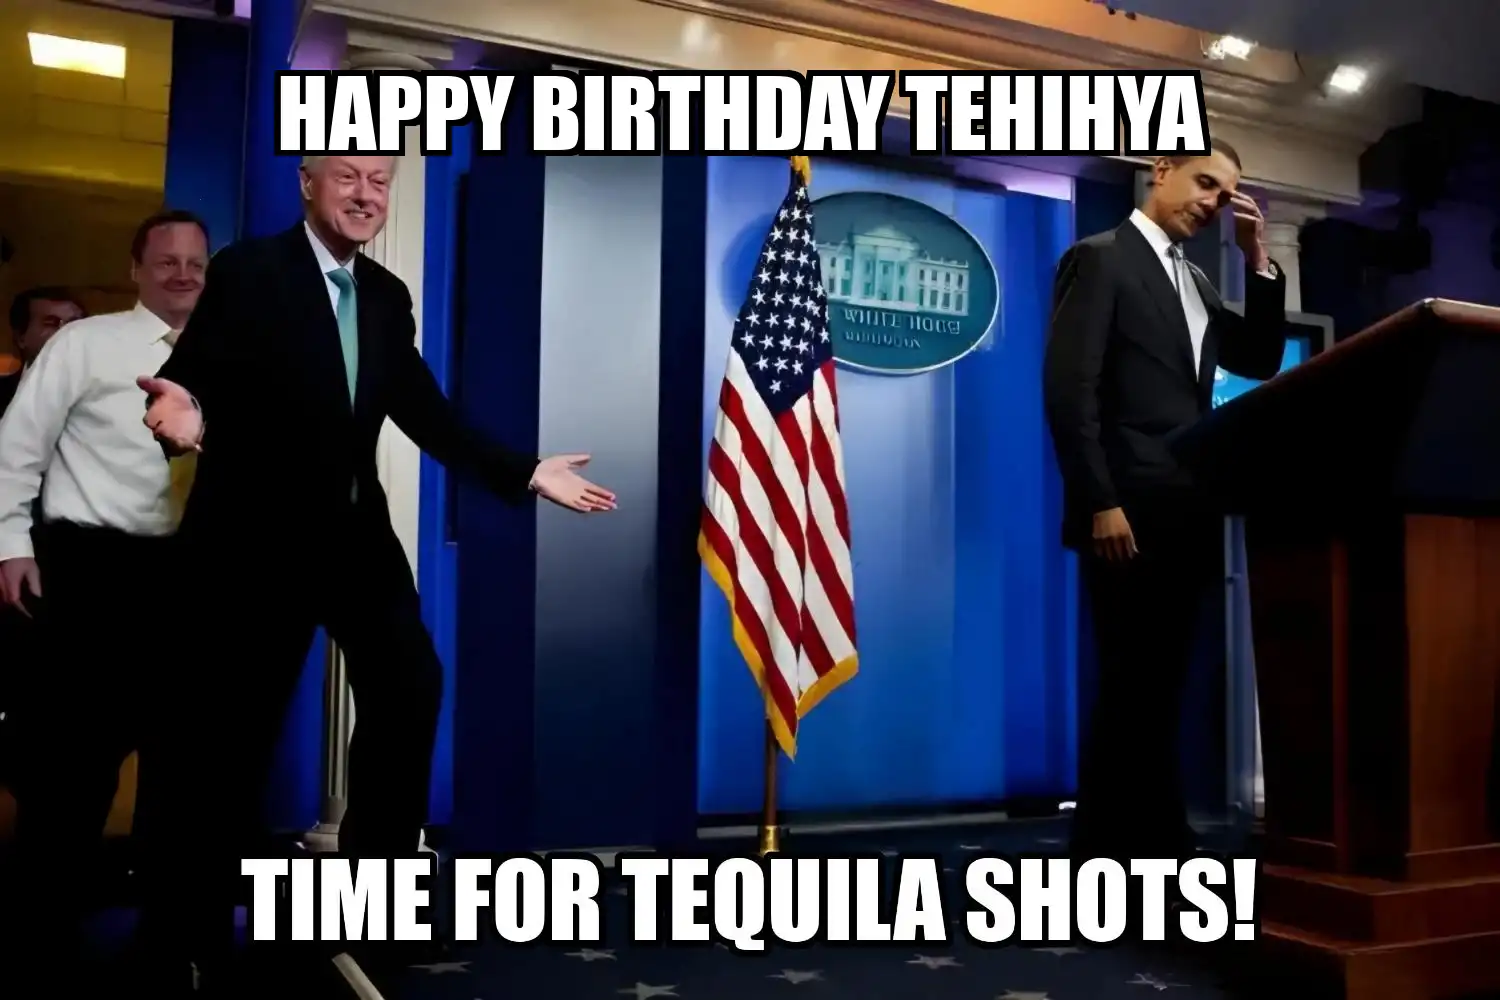 Happy Birthday Tehihya Time For Tequila Shots Memes